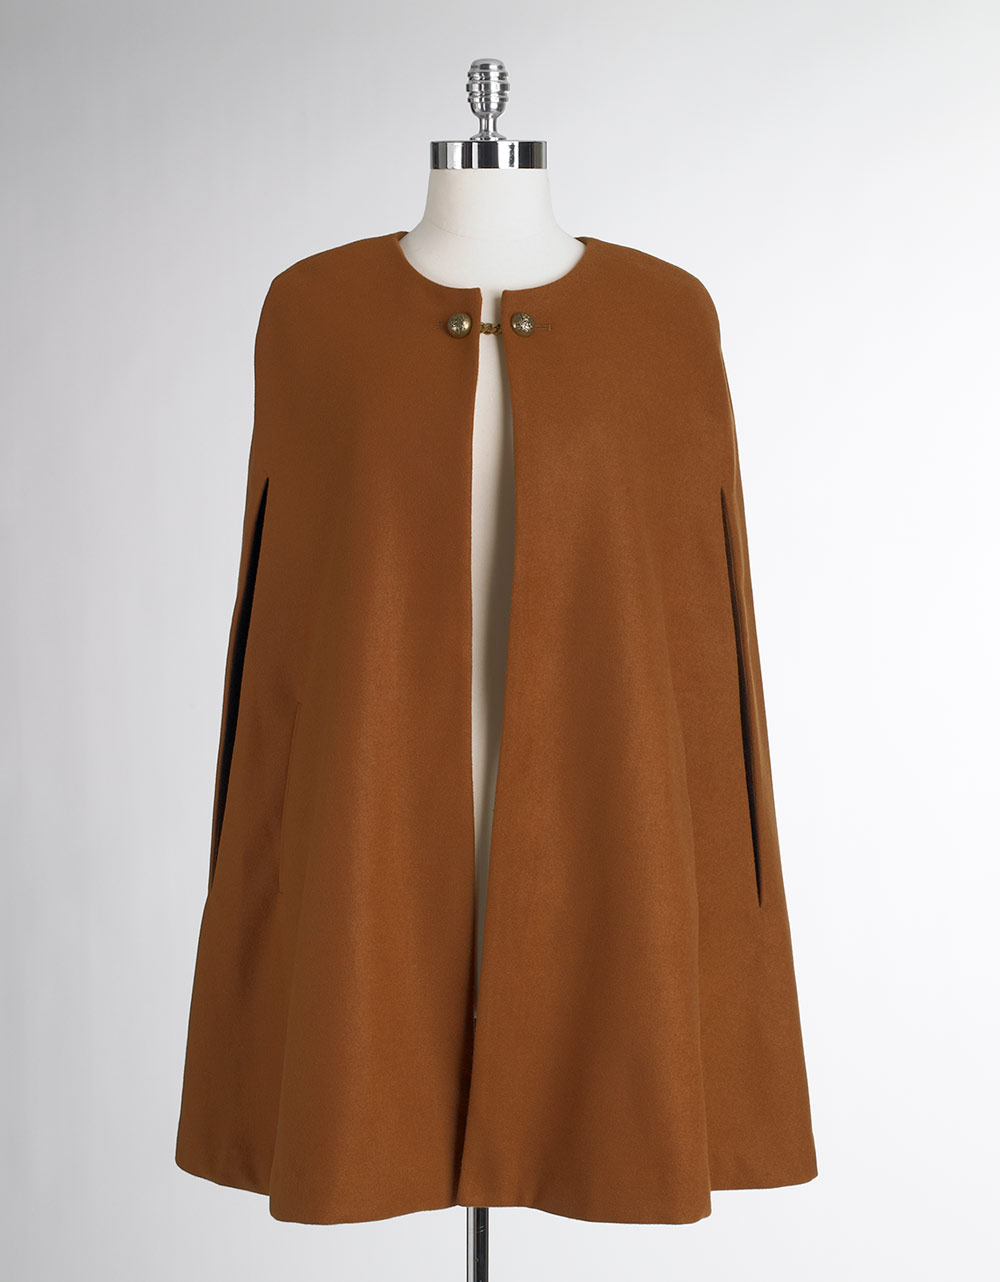 Lyst - Vince camuto Button Neck Cape in Brown